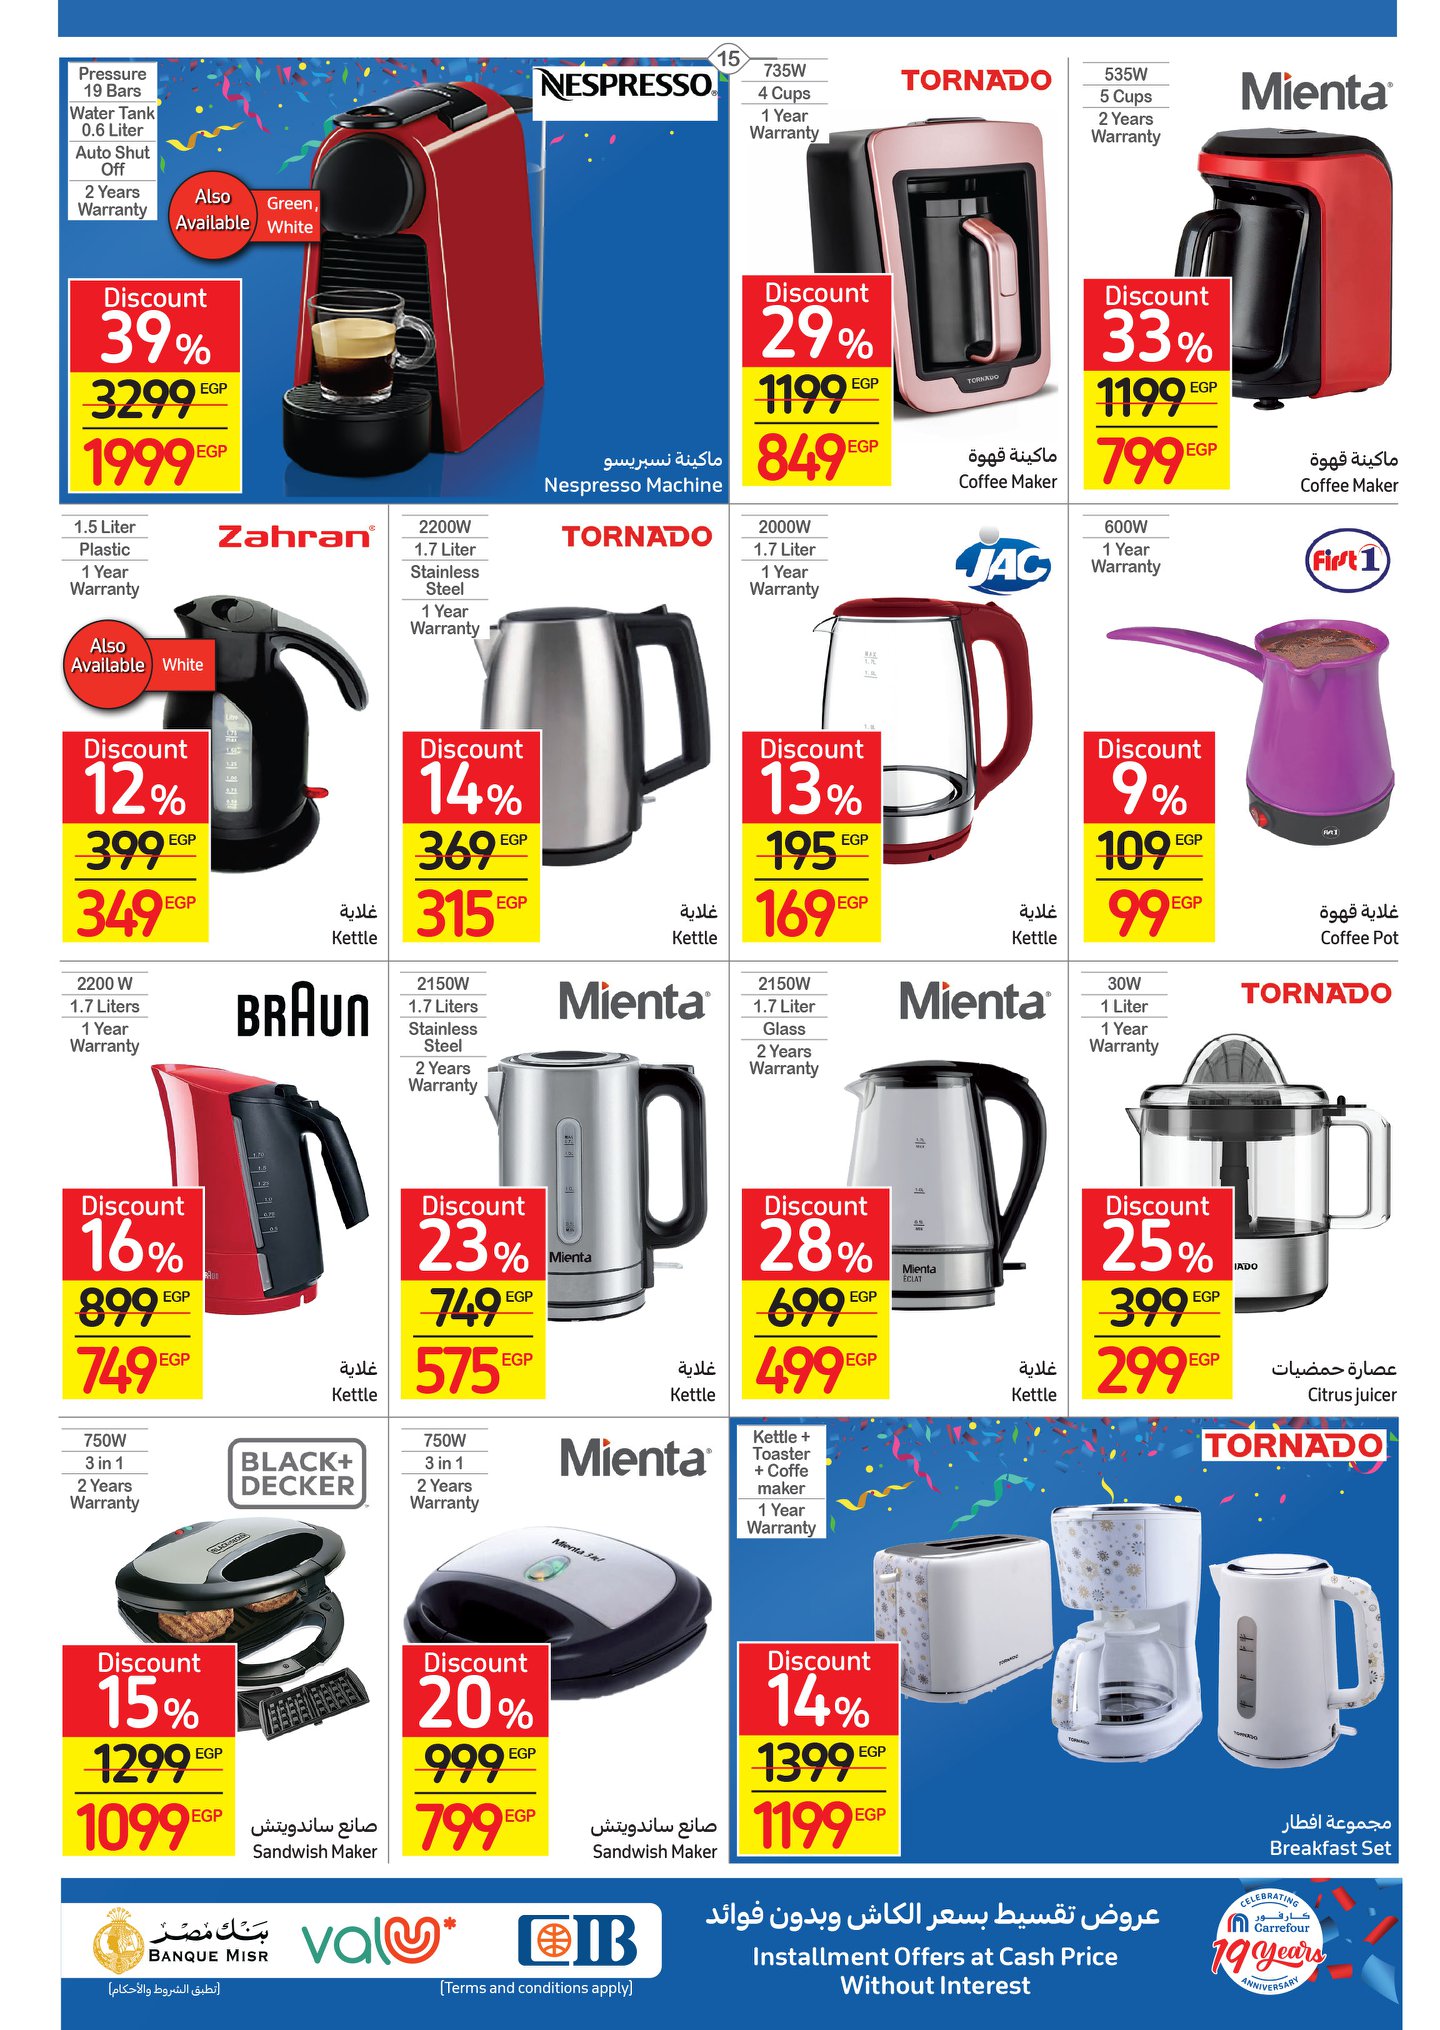 Carrefour magazine offers complete with 50% discounts and a surprise purchase in convenient installments without interest 19